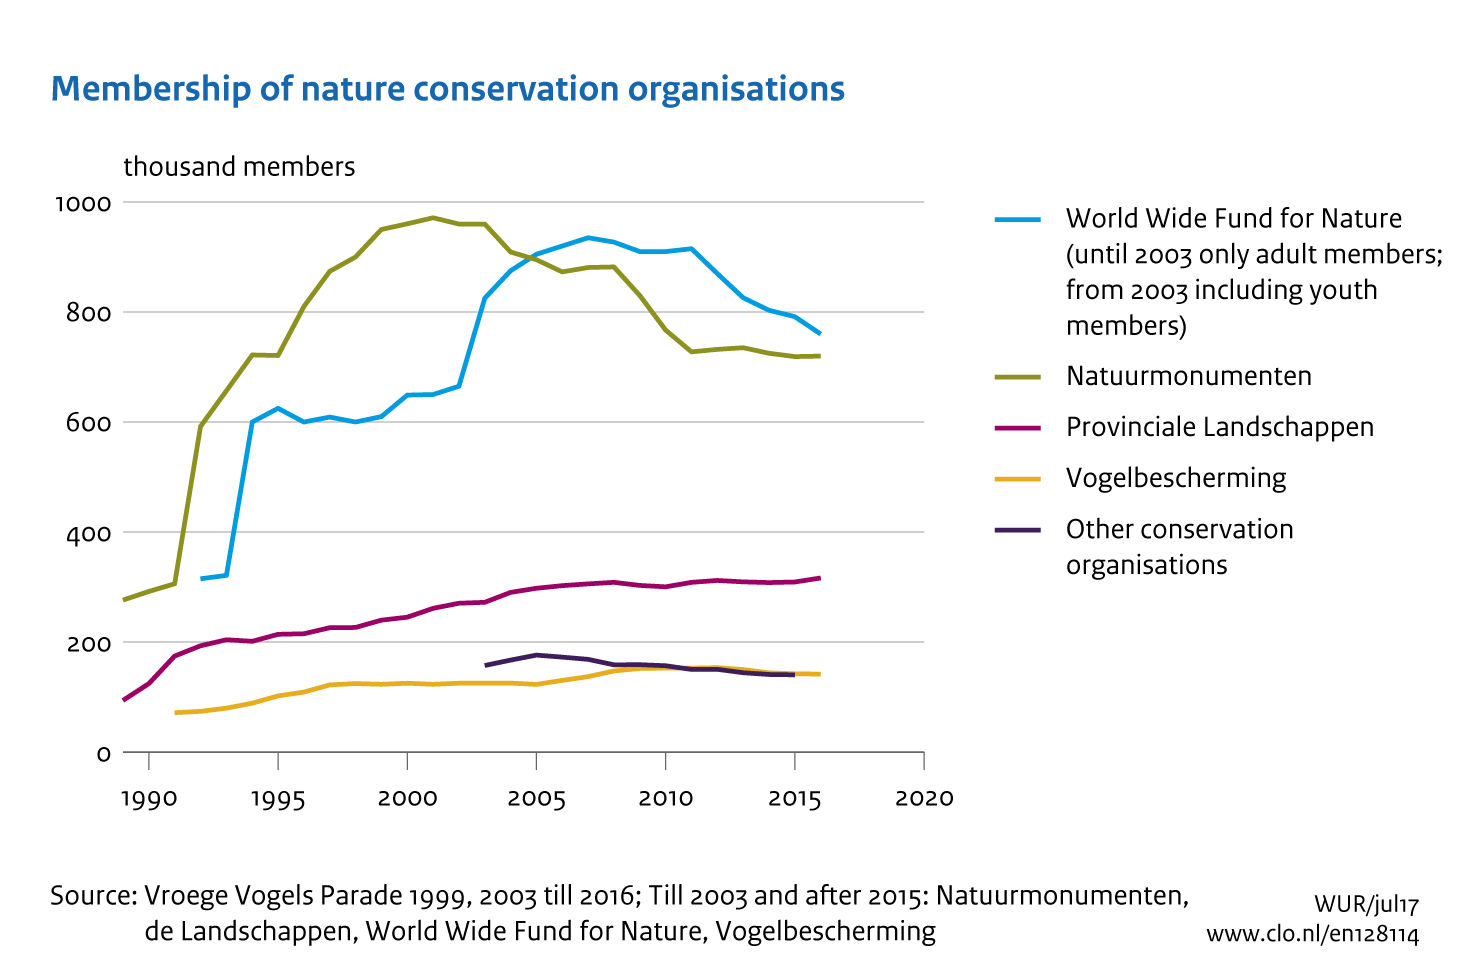 Image Membership nature conservation organisations. The image is further explained in the text.